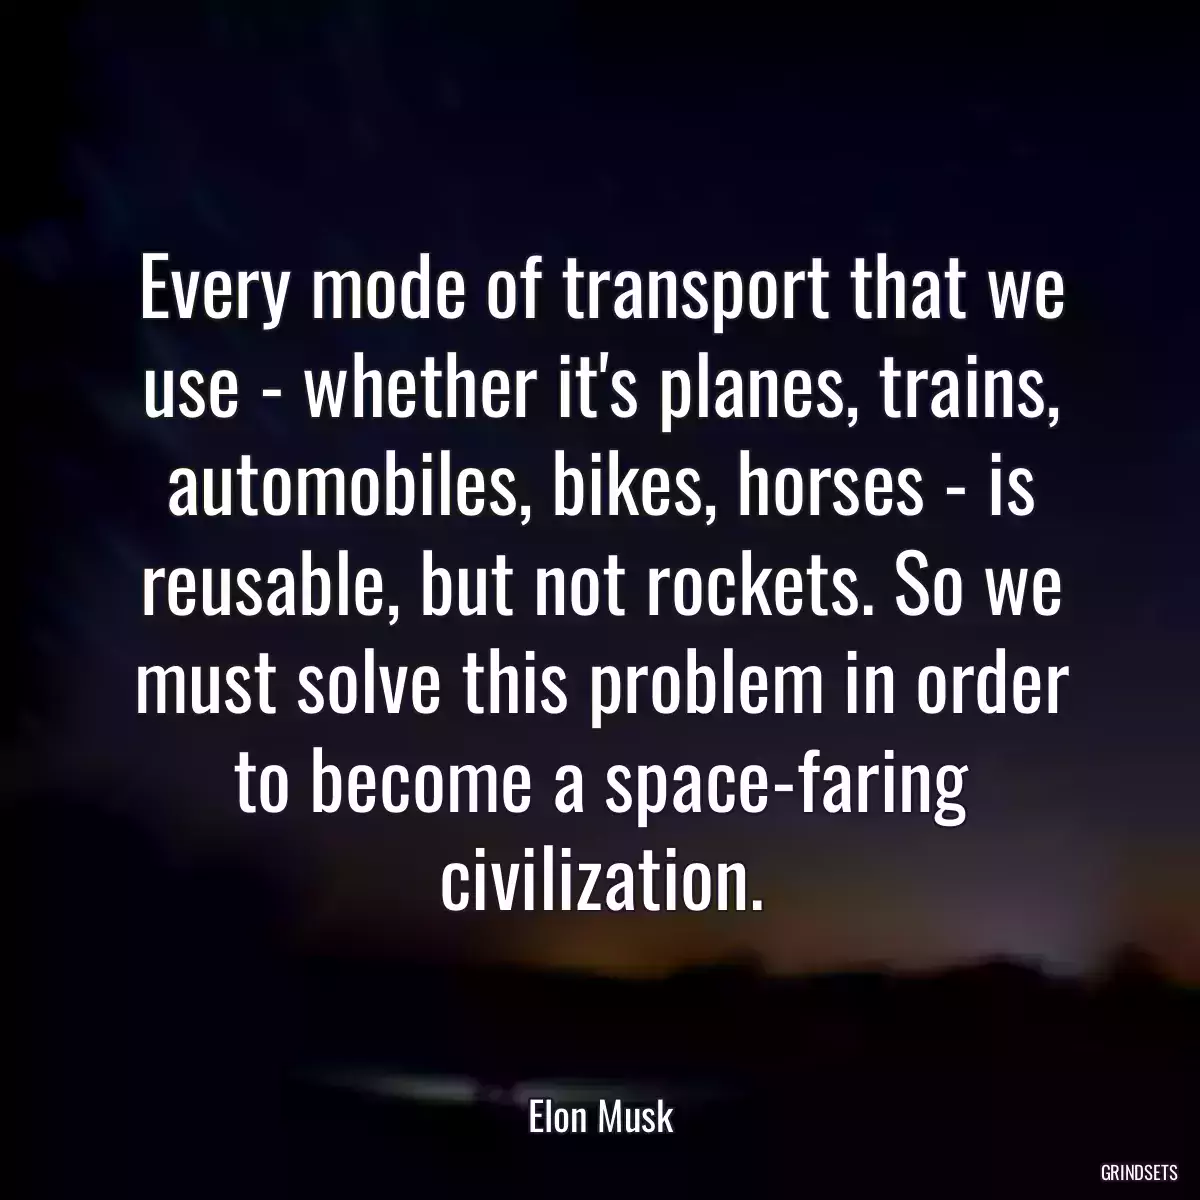 Every mode of transport that we use - whether it\'s planes, trains, automobiles, bikes, horses - is reusable, but not rockets. So we must solve this problem in order to become a space-faring civilization.